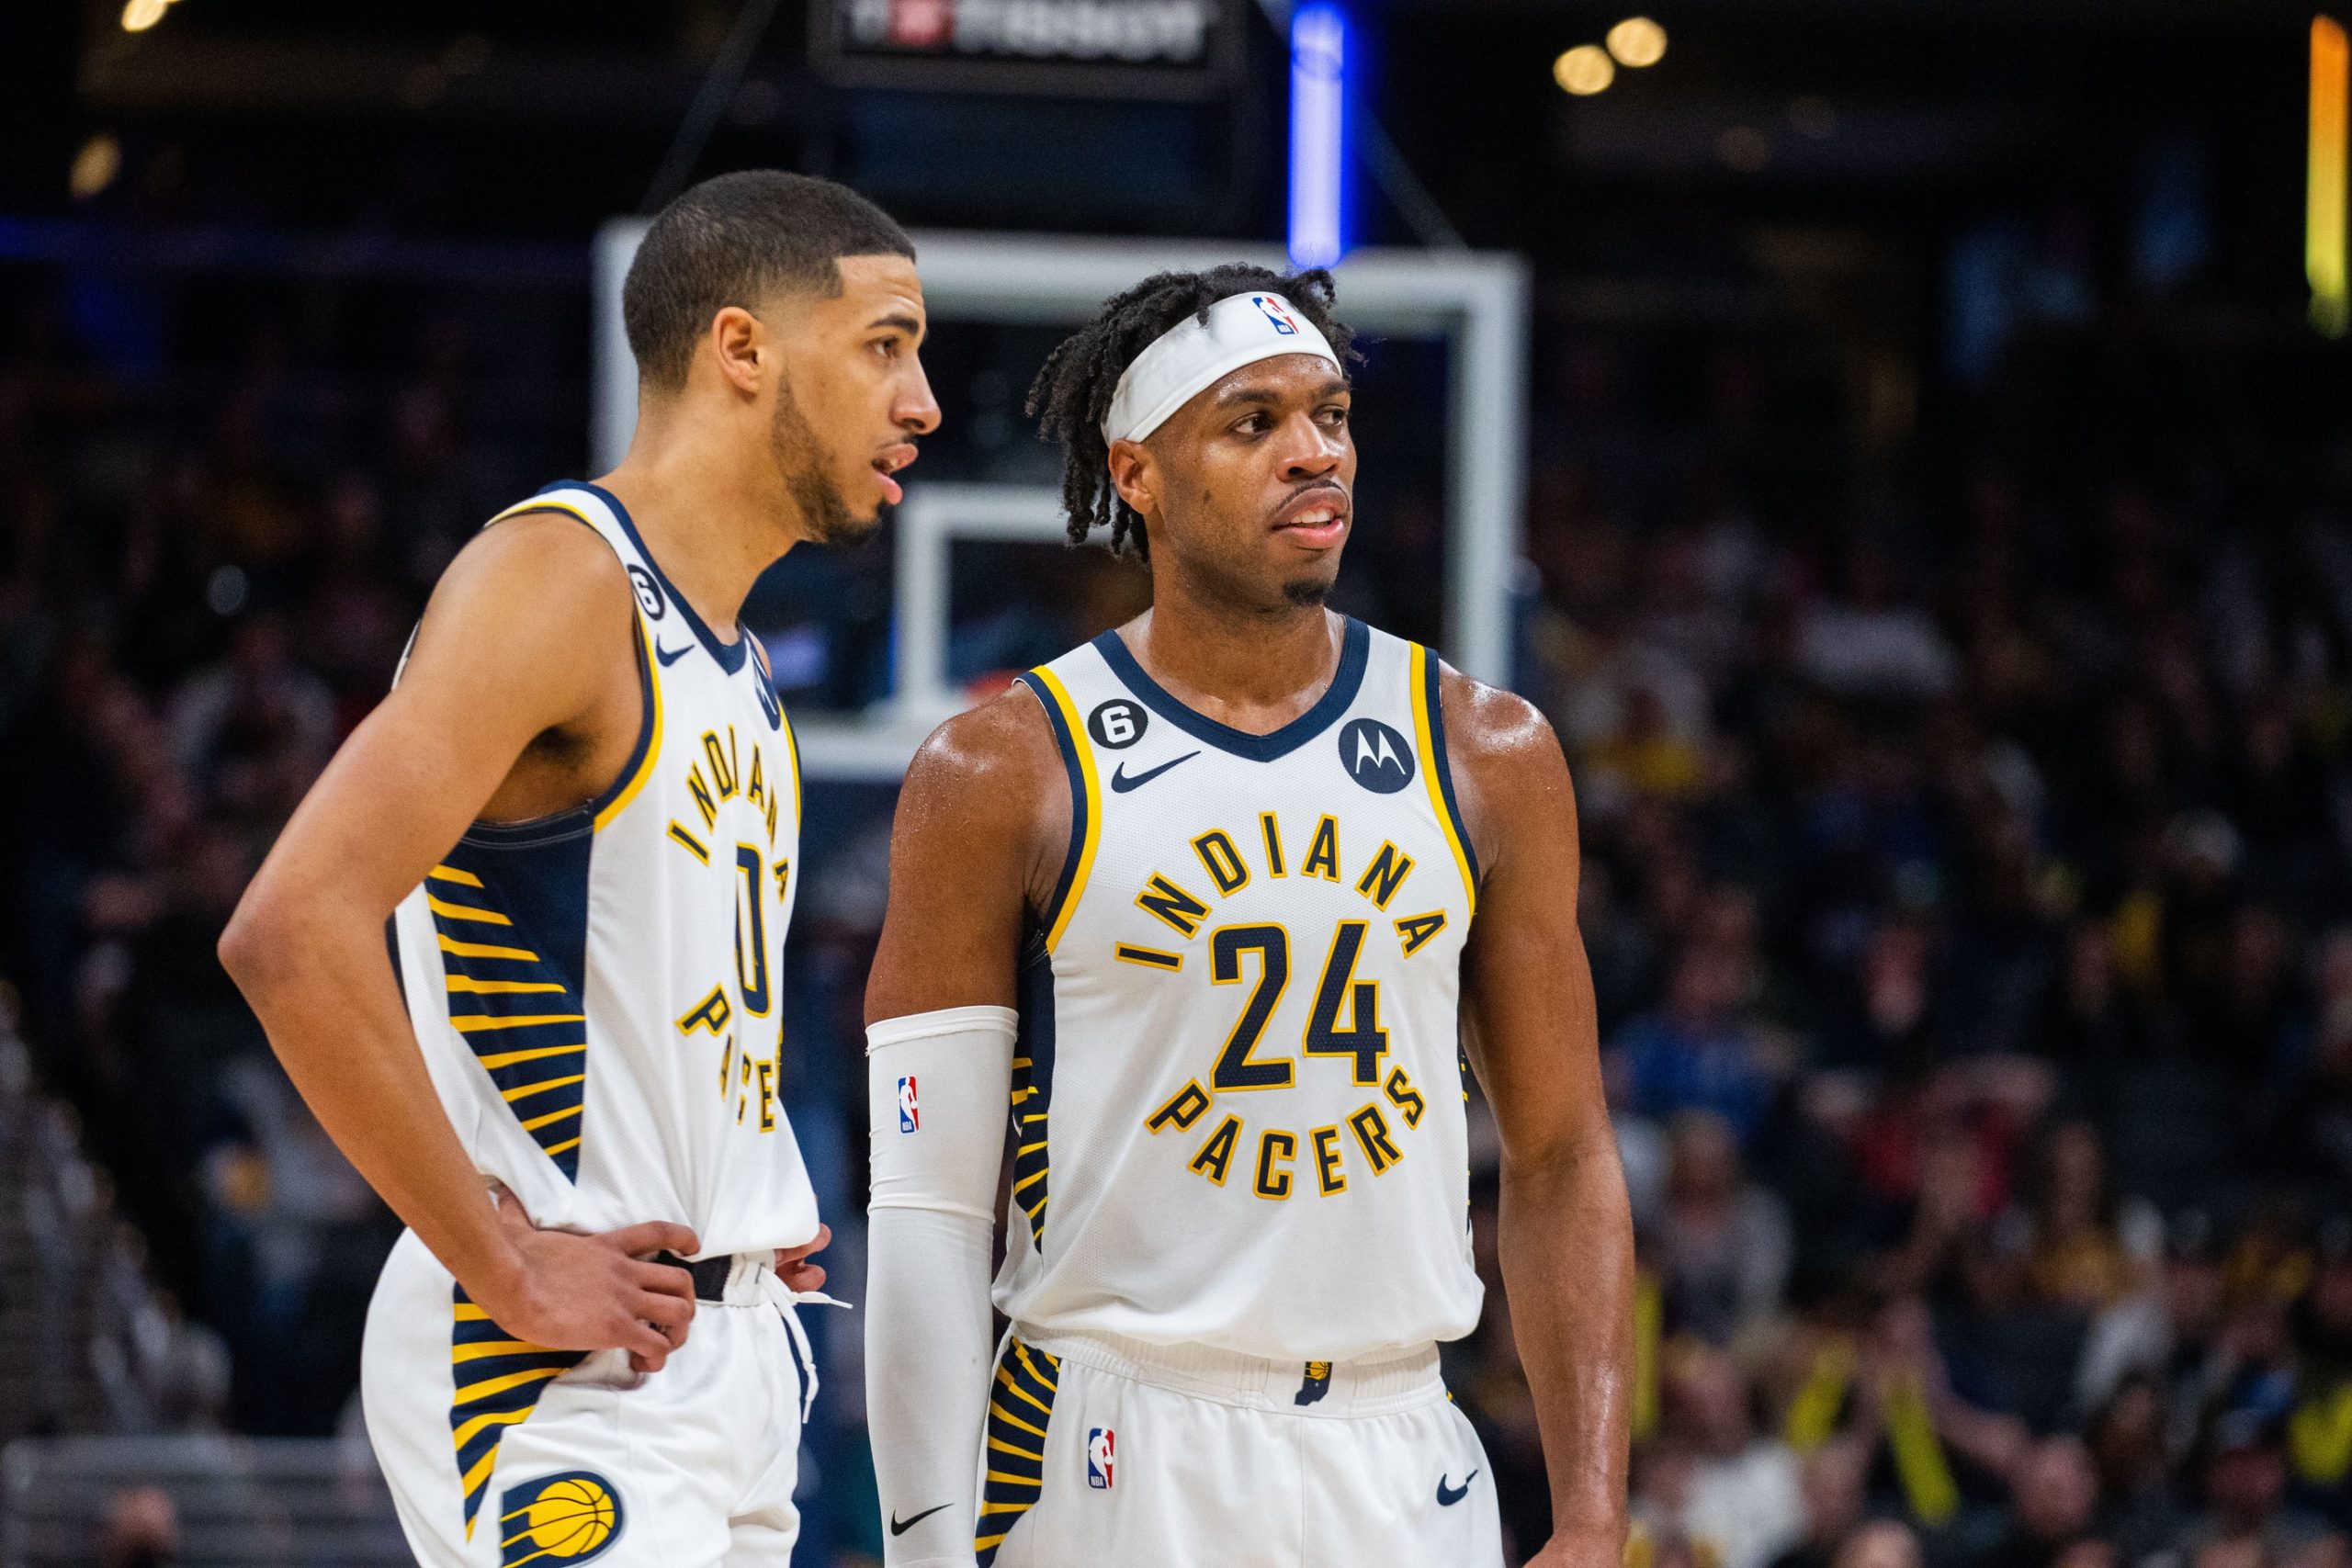 New Jerseys for 2023-24? : r/pacers